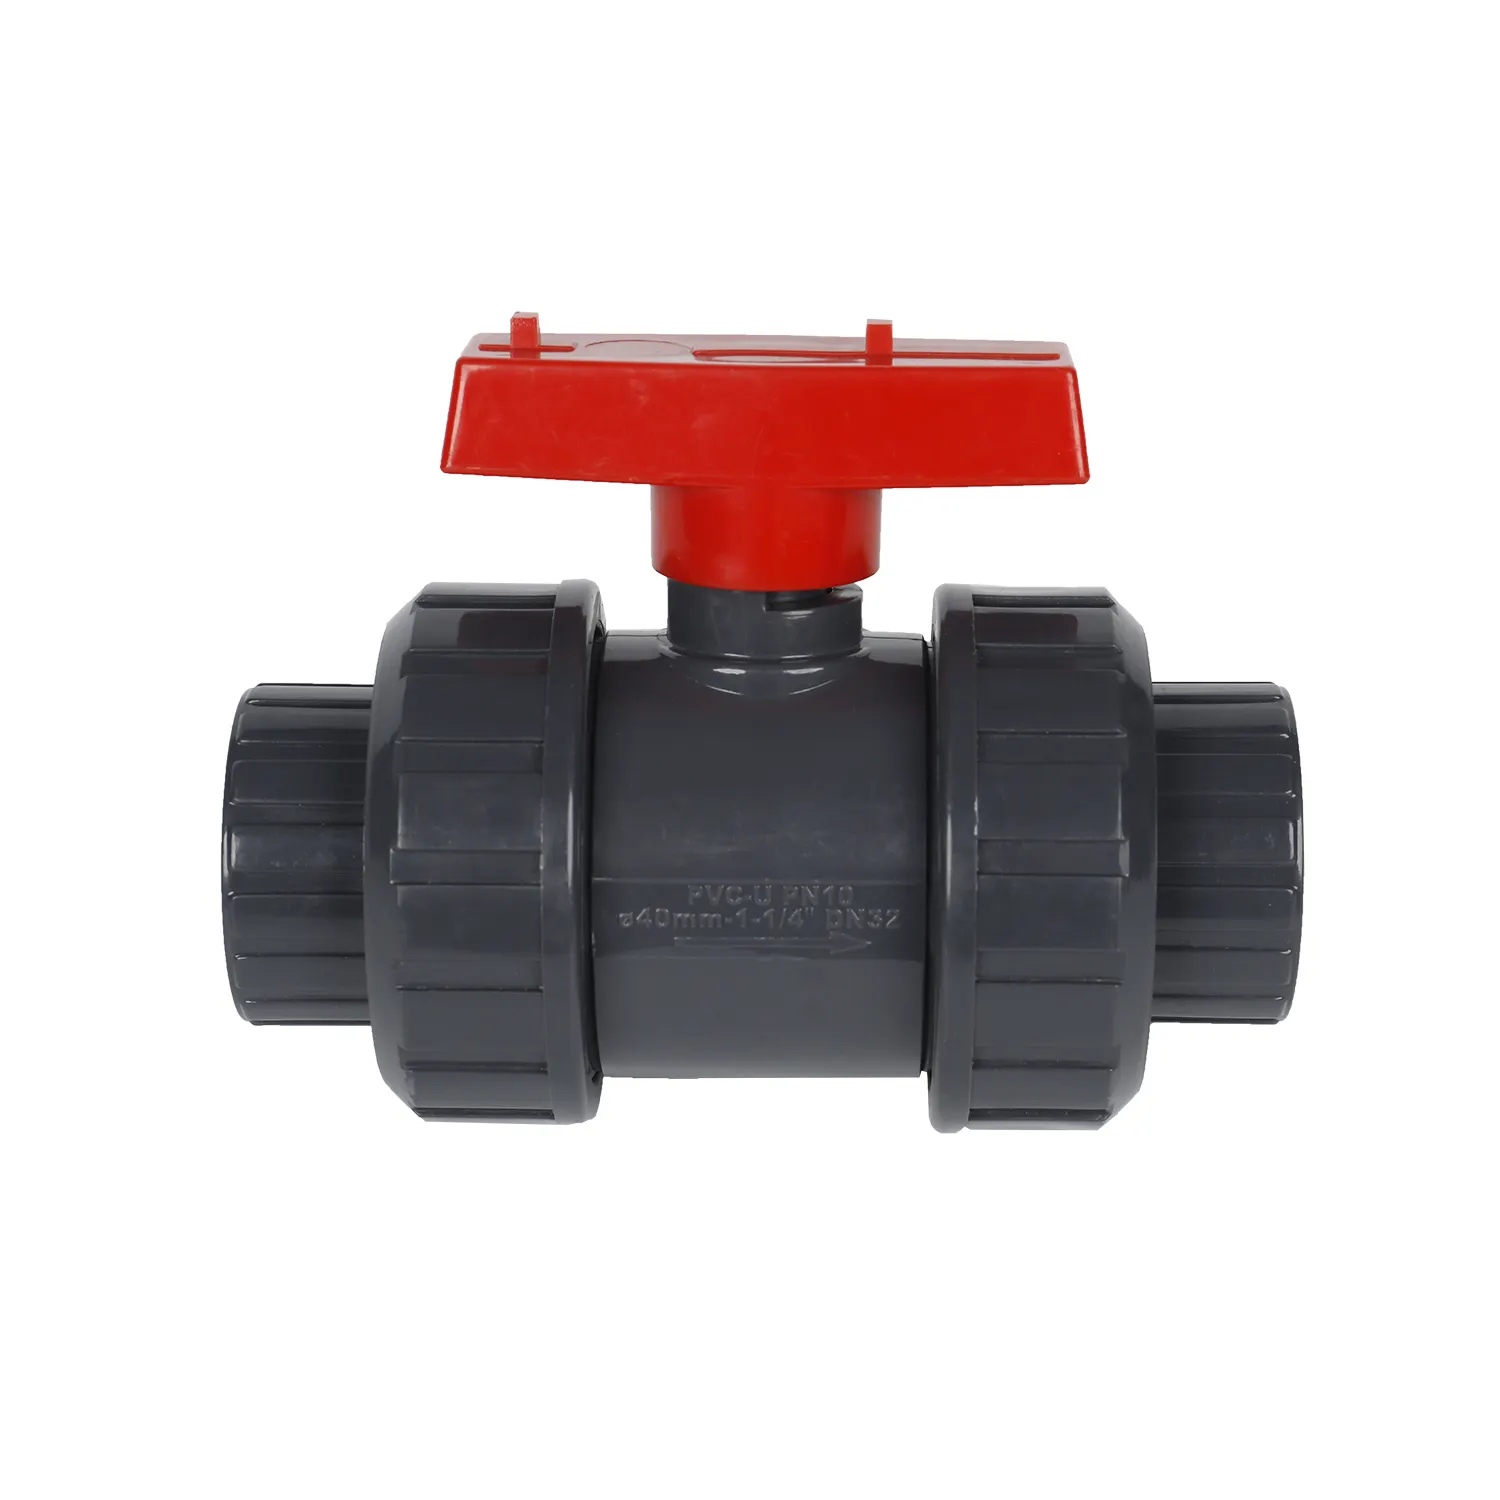 High quality valve manufacturers and suppliers butterfly 3 way angle ball valve pn40